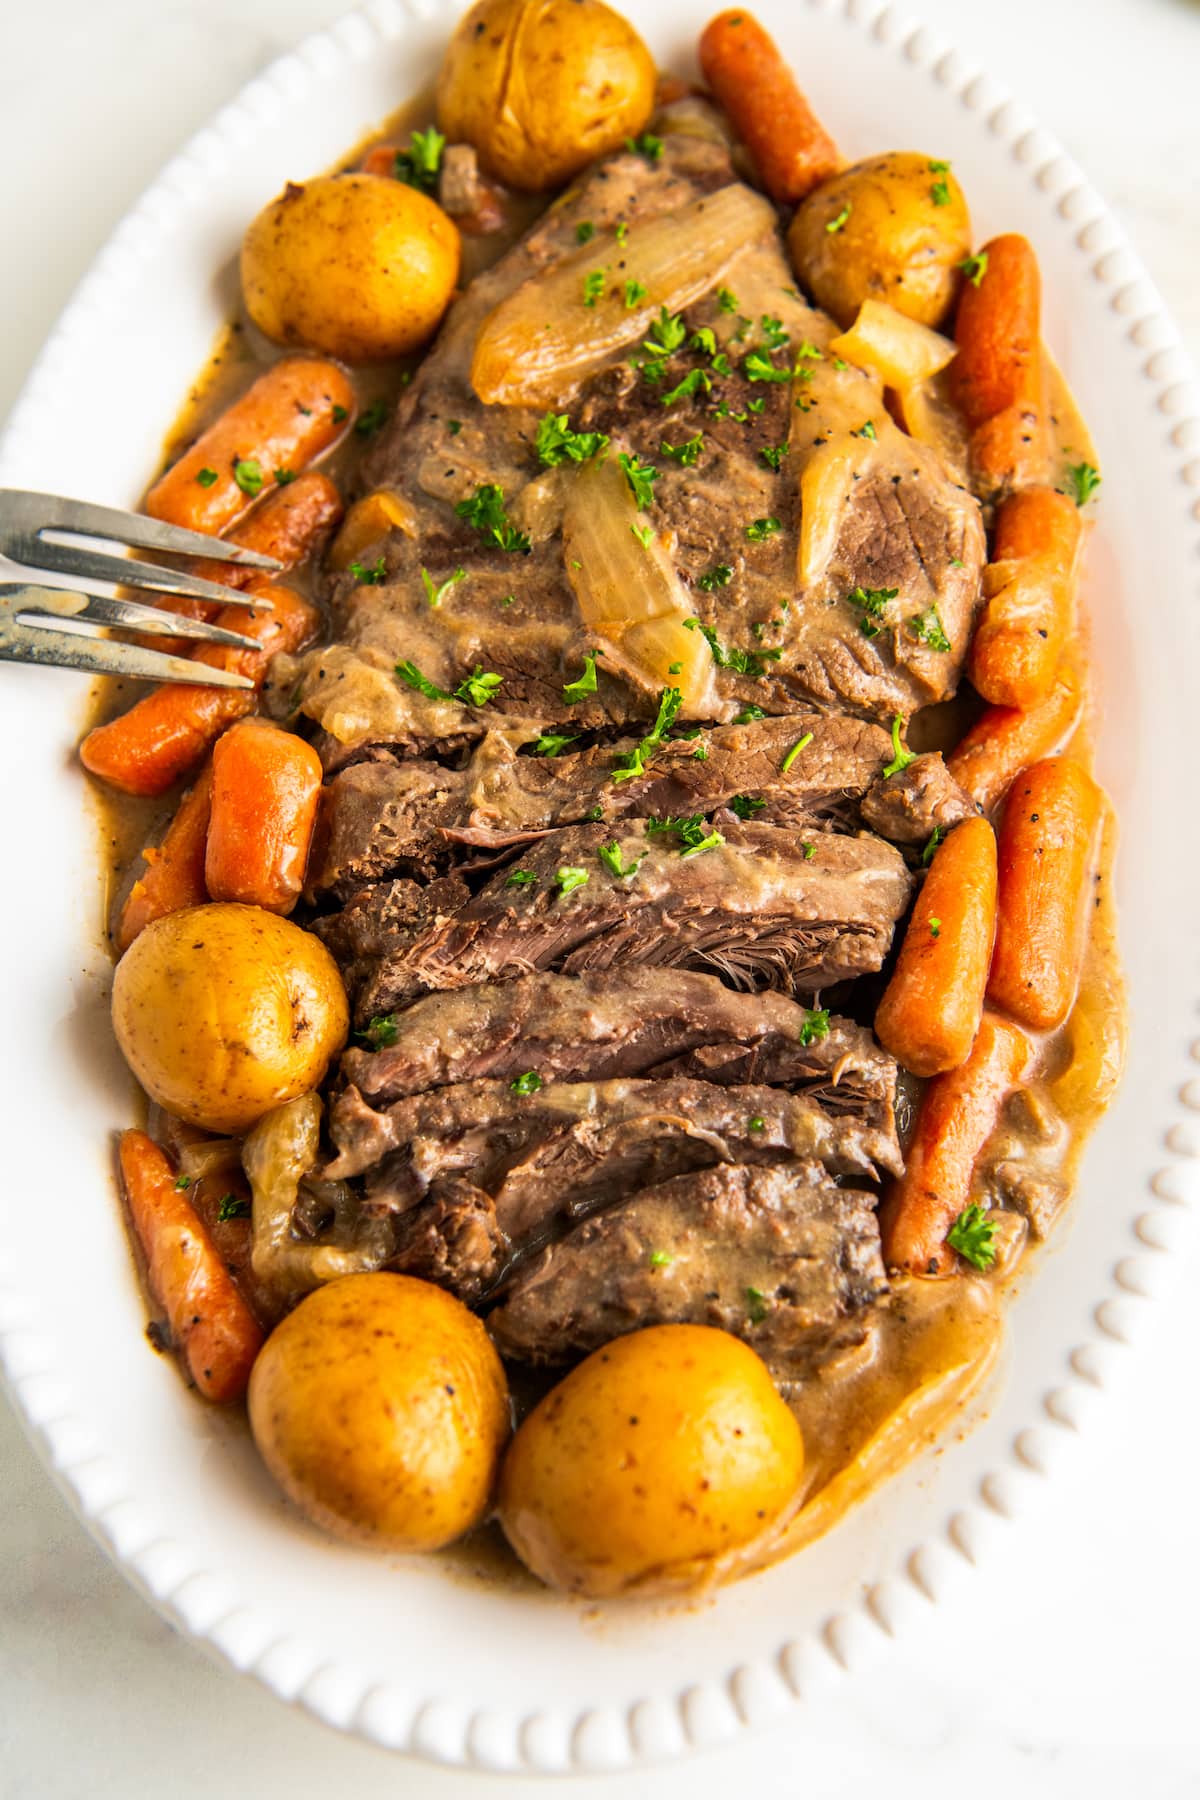 A white serving plate with sliced London broil, potatoes, and carrots.